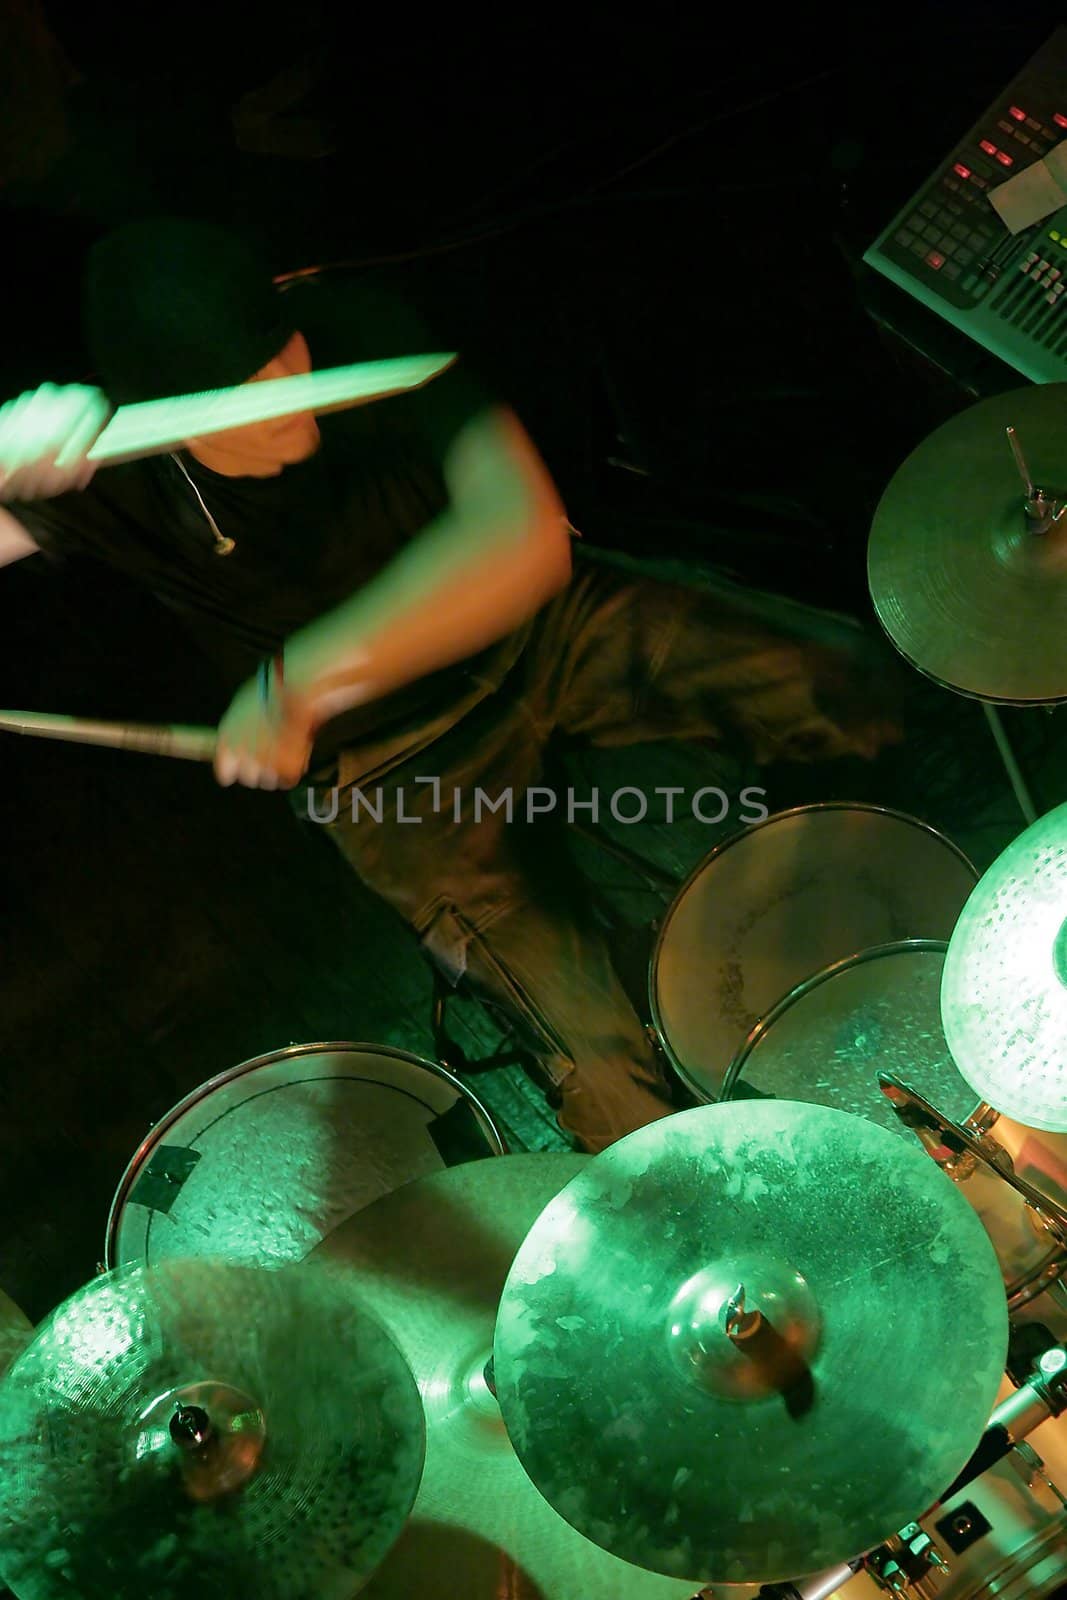 drummer in shadow playing on drums illuminated with green light, drummer is in motion, drumsticks blurred